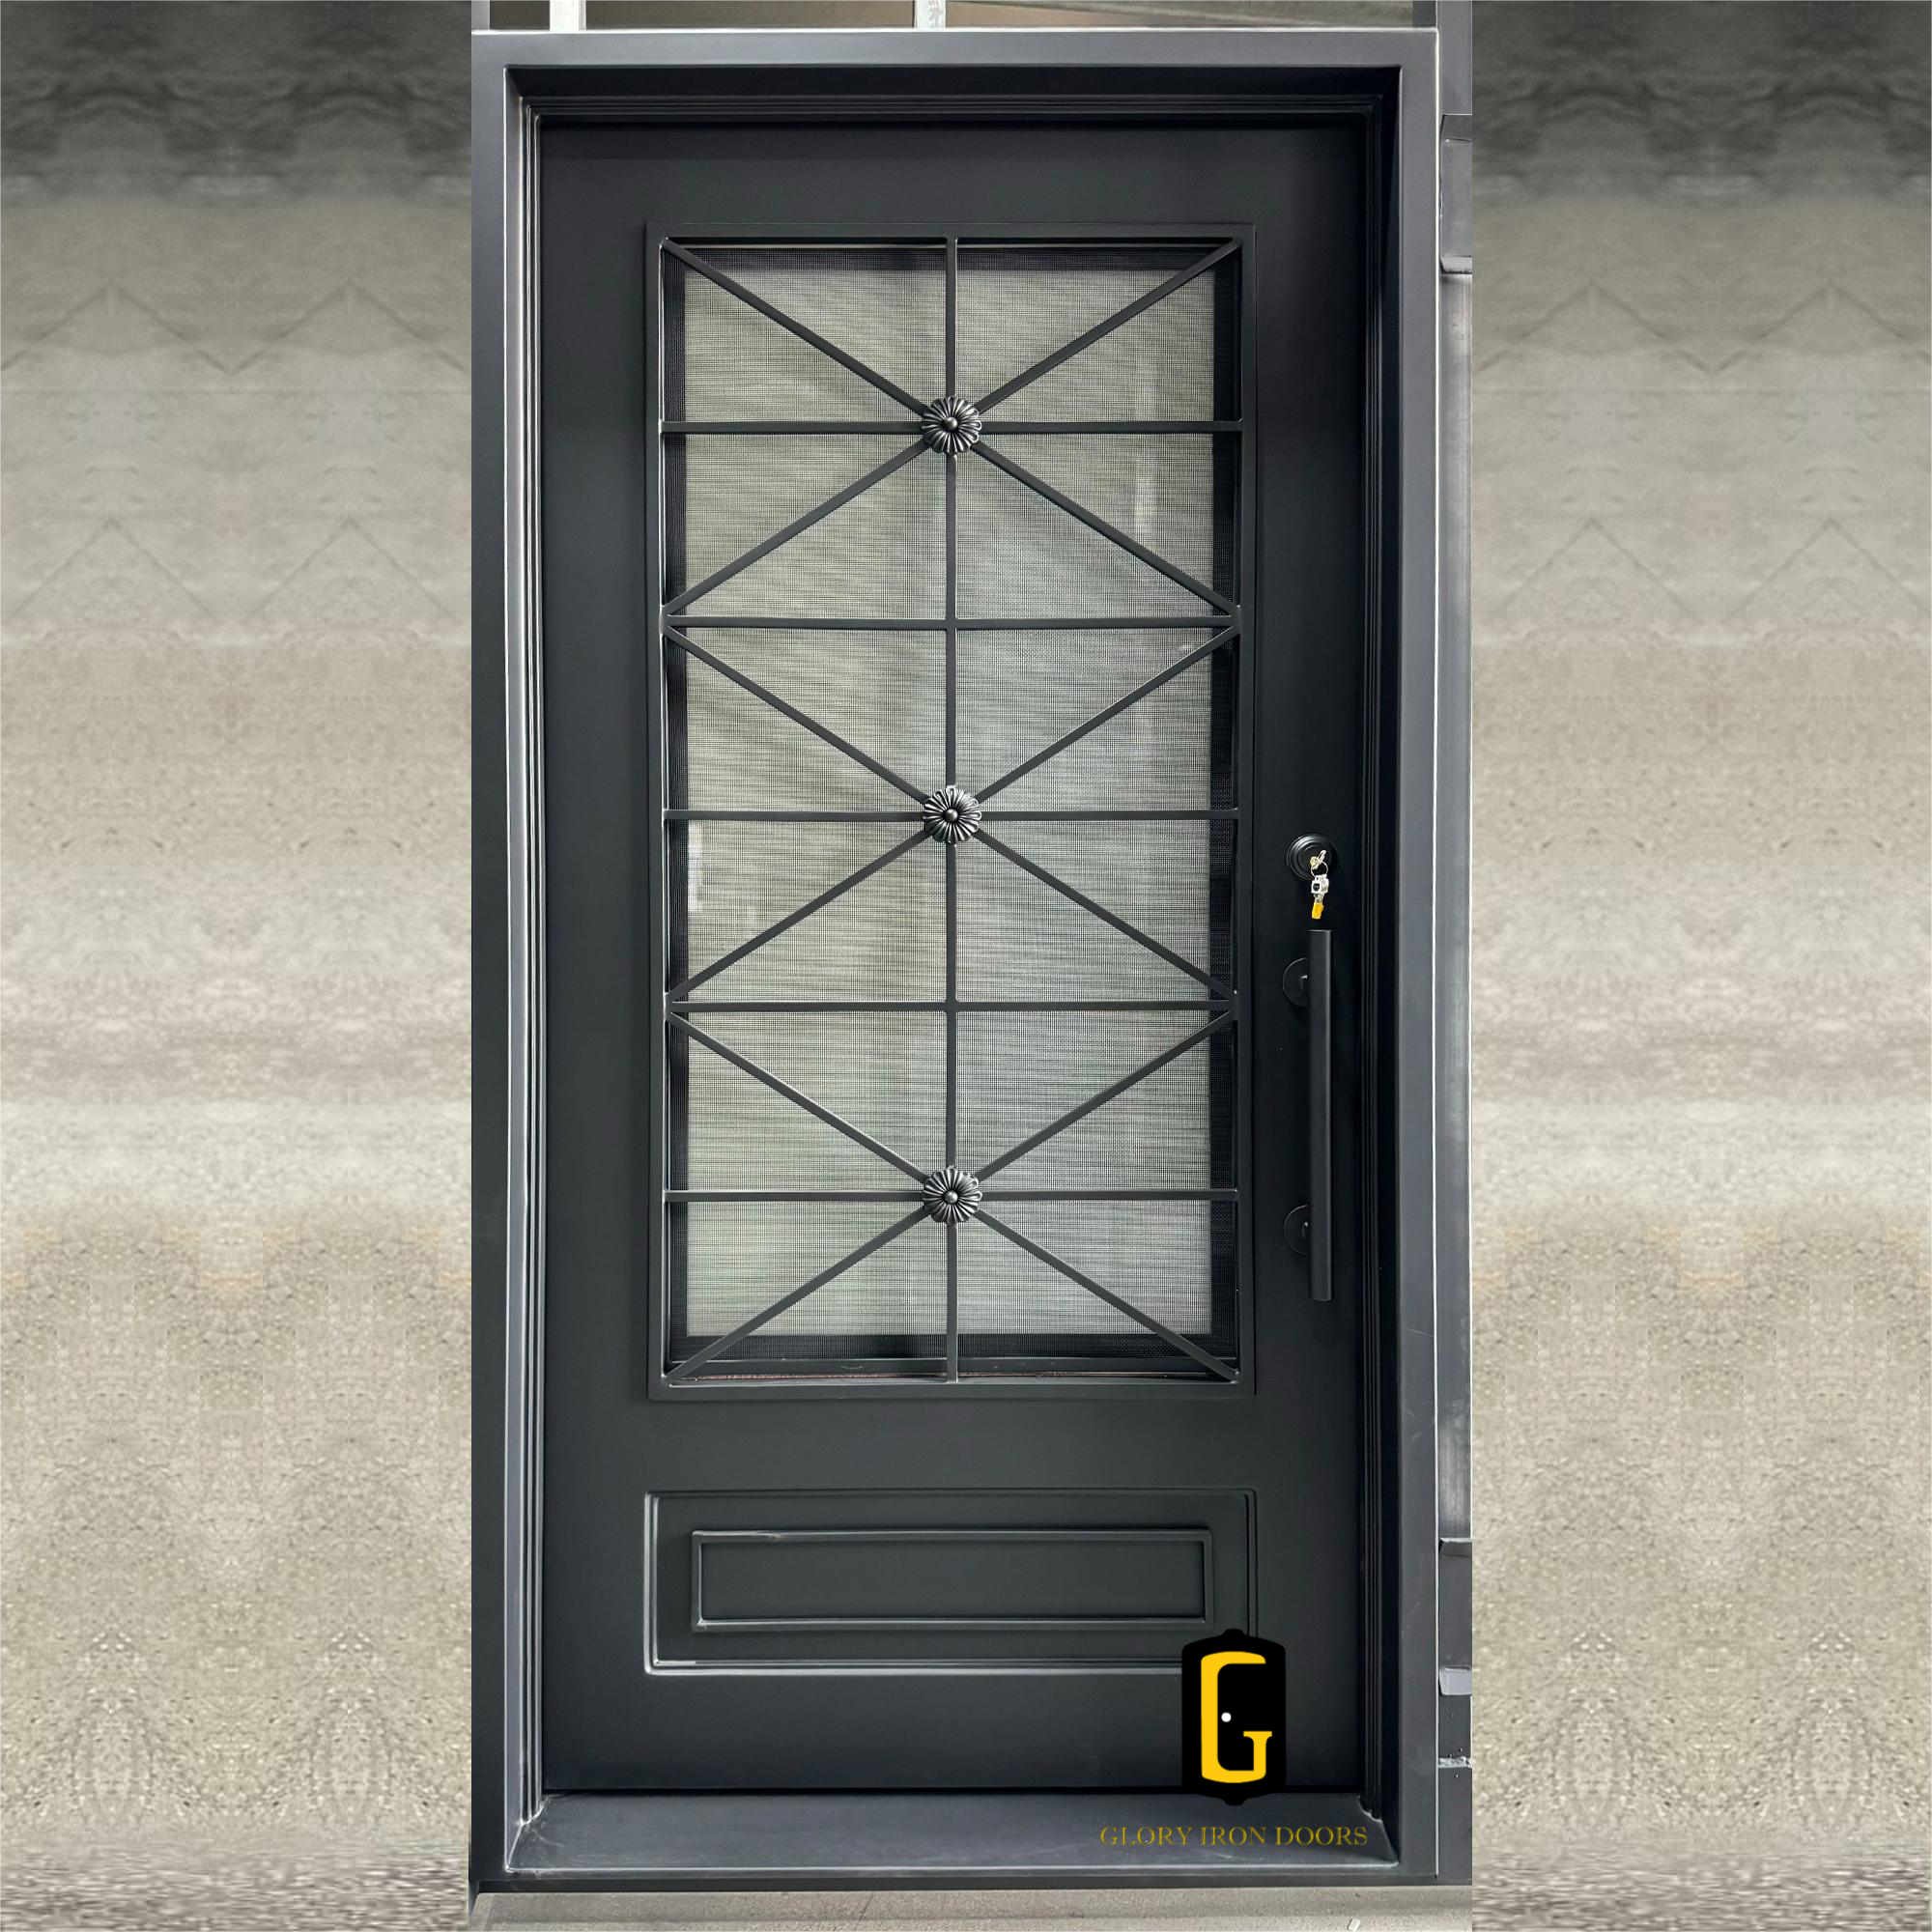 gid thermal break high quality iron single door with good insulation performance 